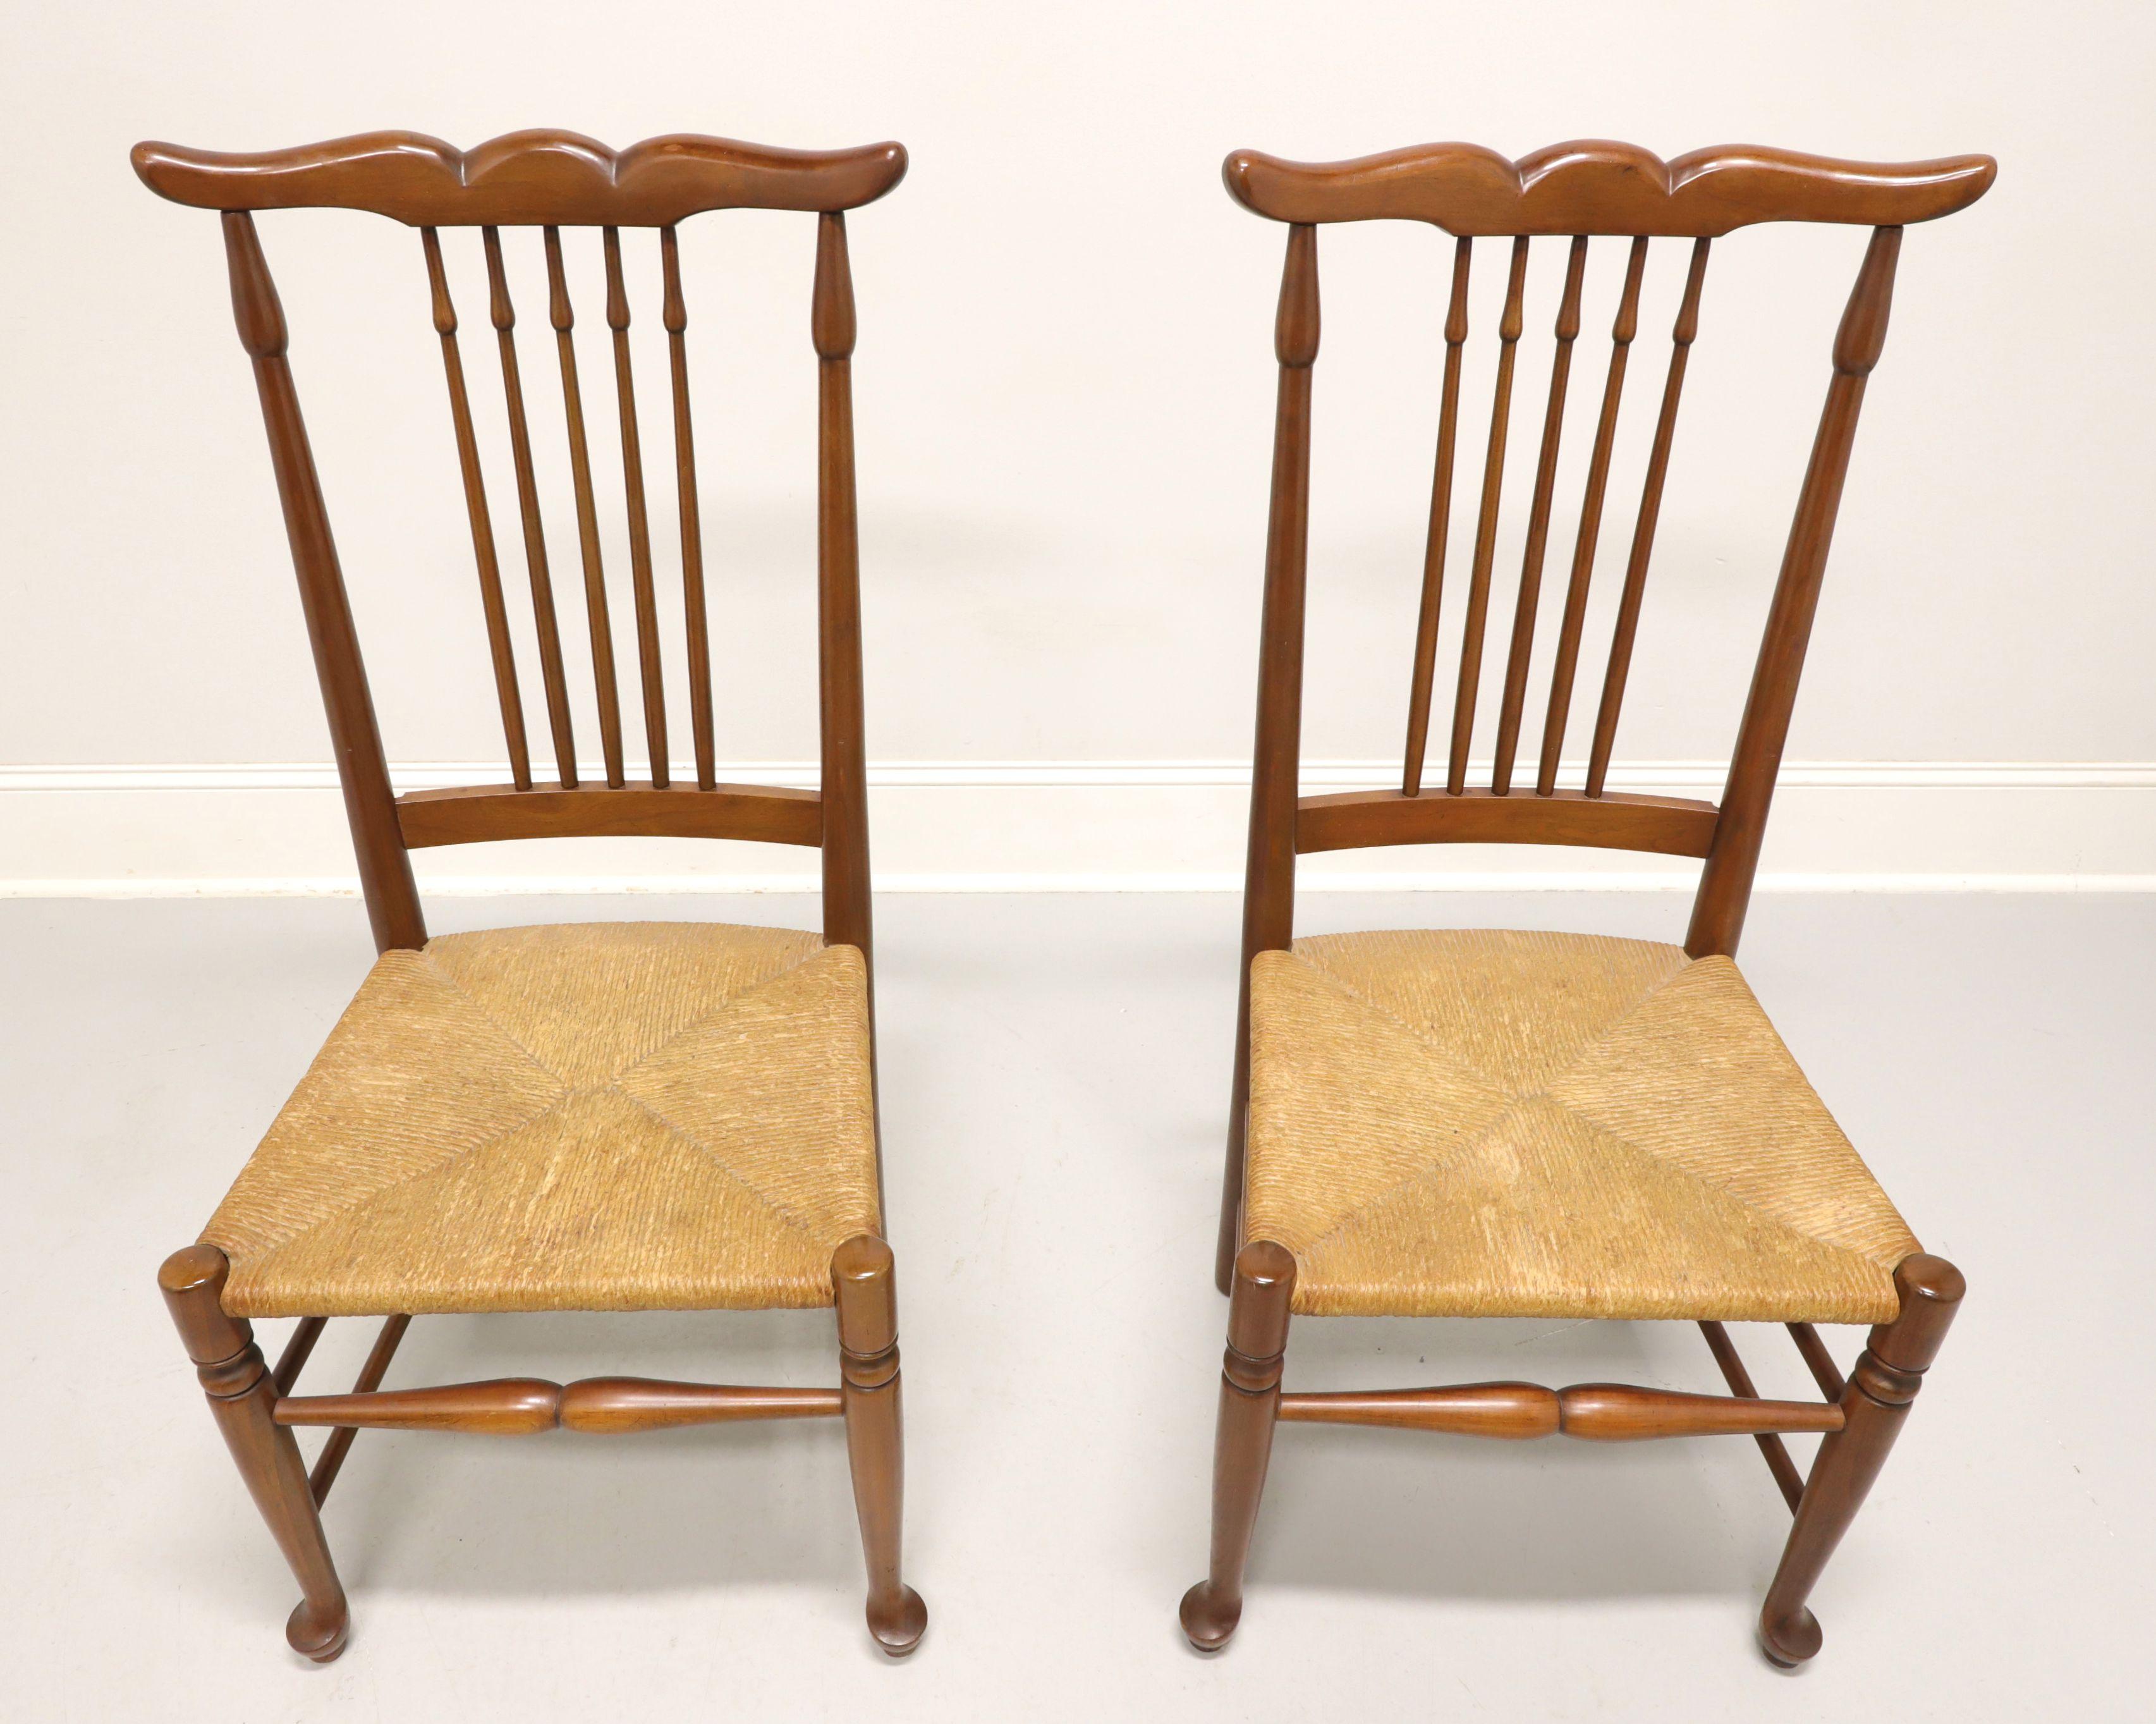 A pair of dining side chairs in the Rustic Farmhouse style, unbranded, similar in quality to Ethan Allen. Solid cherry, uniquely carved crestrail, spear shaped stiles & backrest spindles, rush seats, turned front stretcher, turned front legs and pad